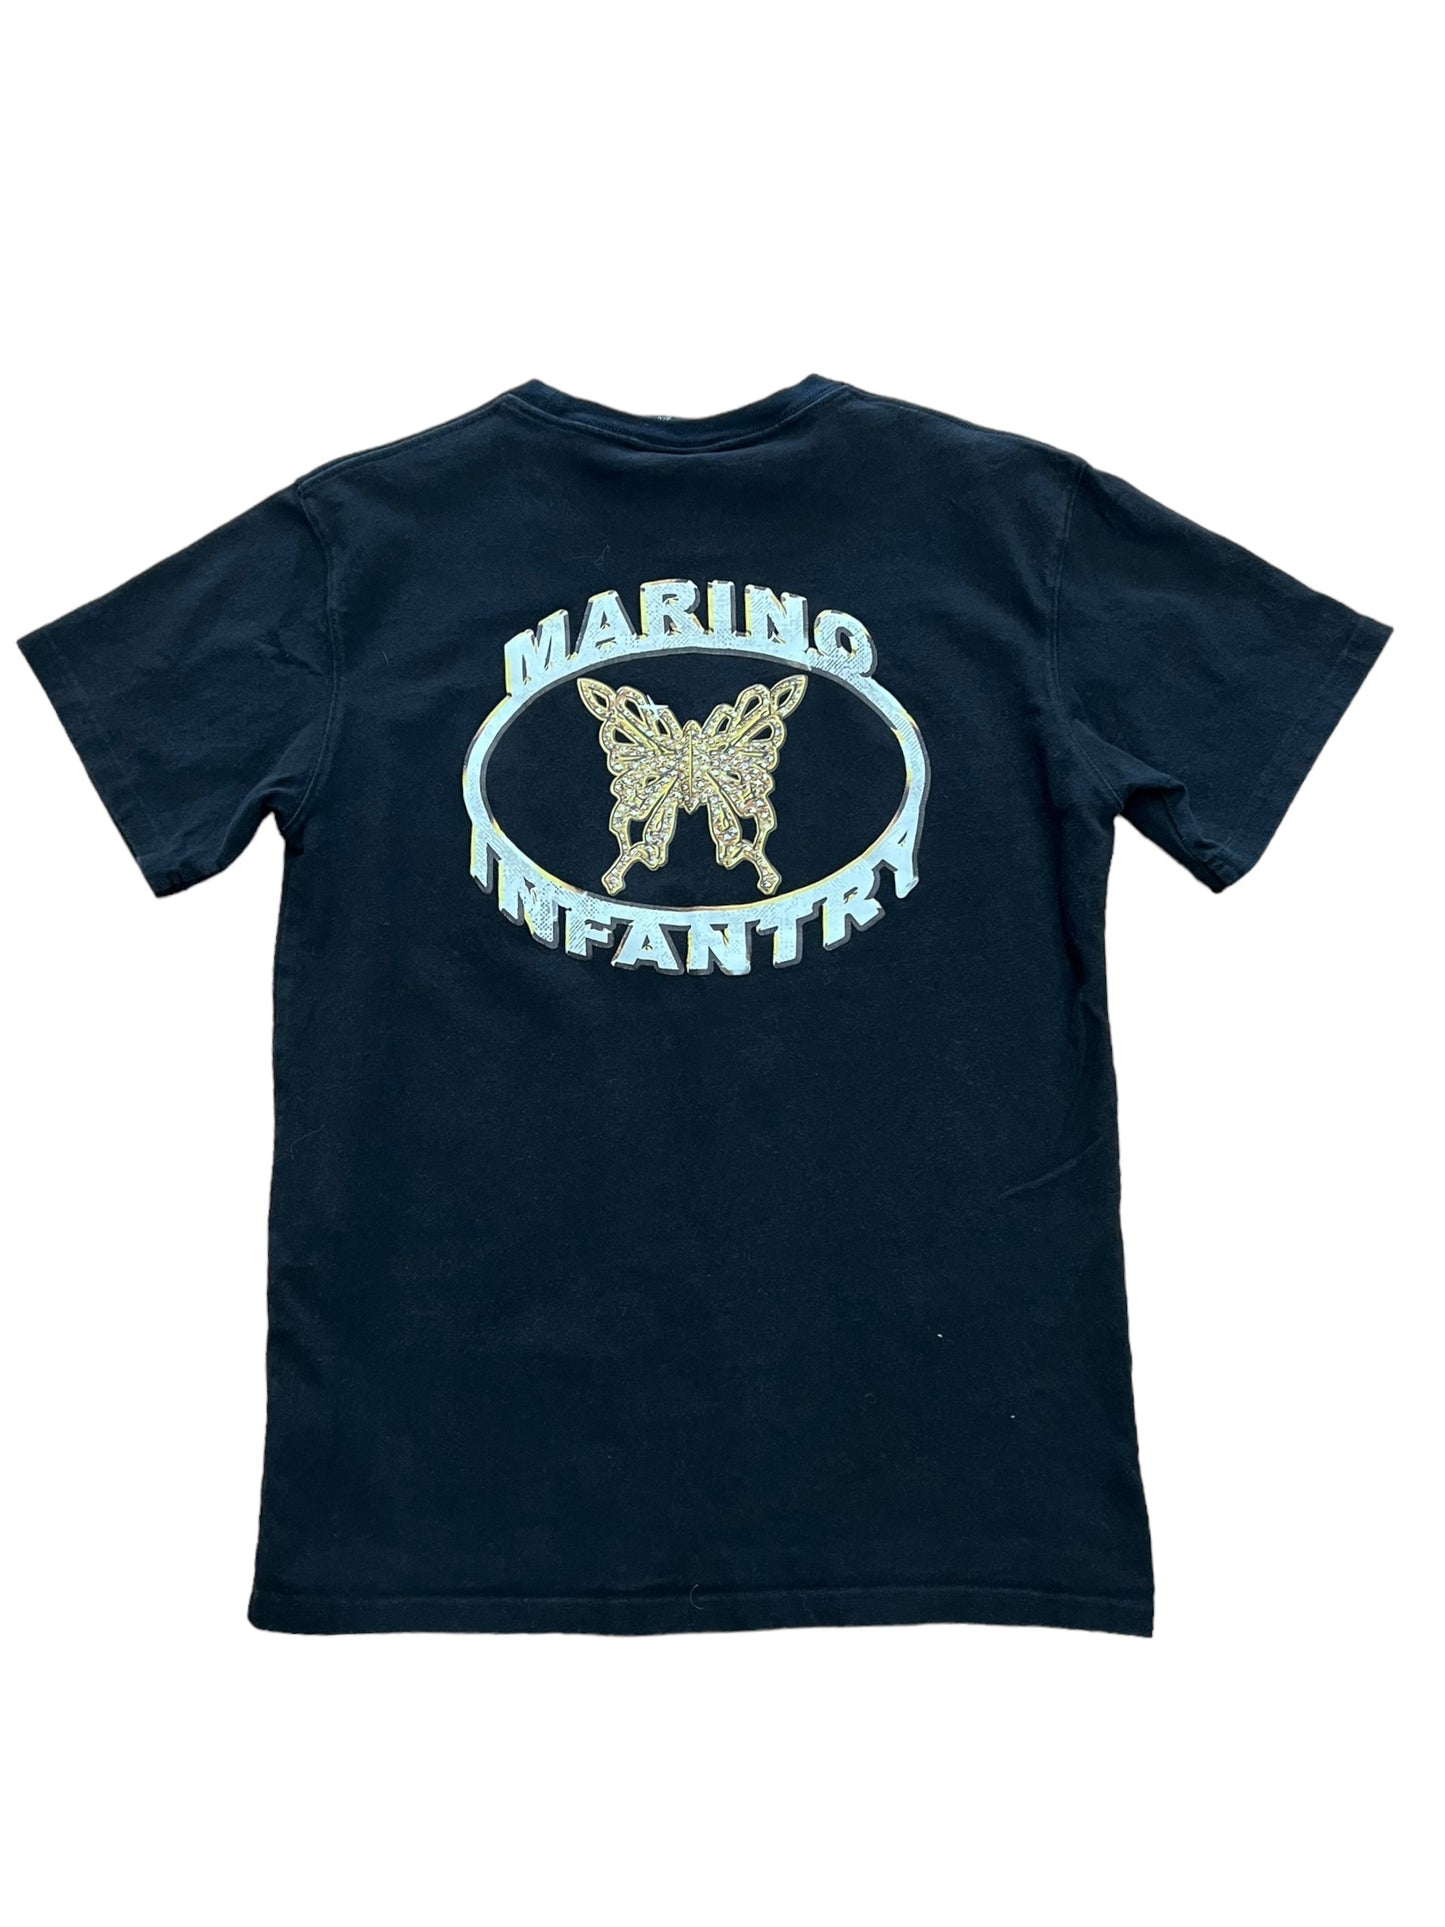 Marino Infantry X Needles tee black pre-owned size 4